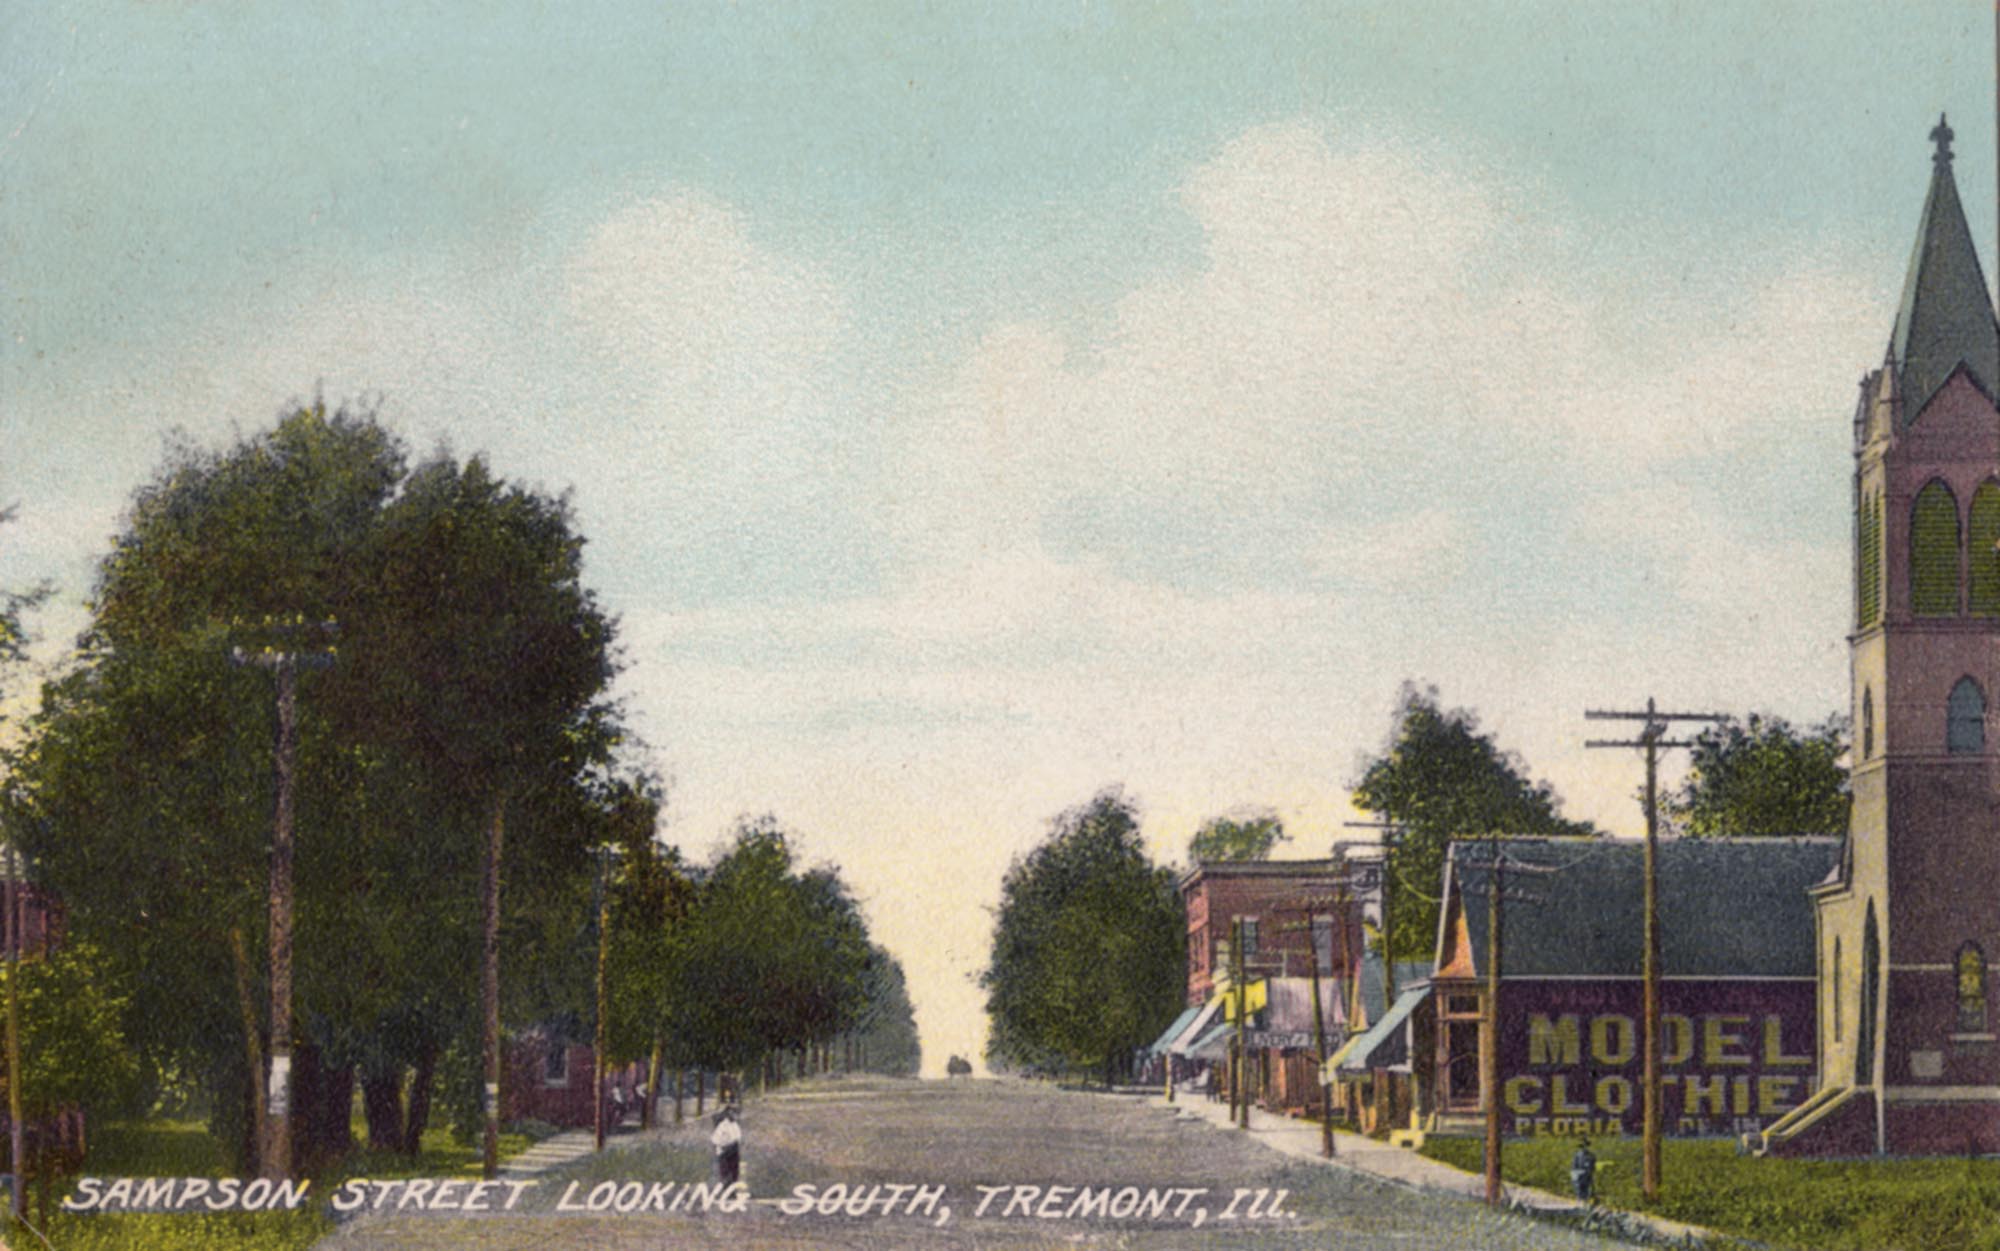 Tremont, Illinois, 1892. Sampson Street looking South. This real photo postcard is the property of, and used with permission of, the Tremont Museum and Historical Society at the corner of Sampson and Madison Streets in Tremont.